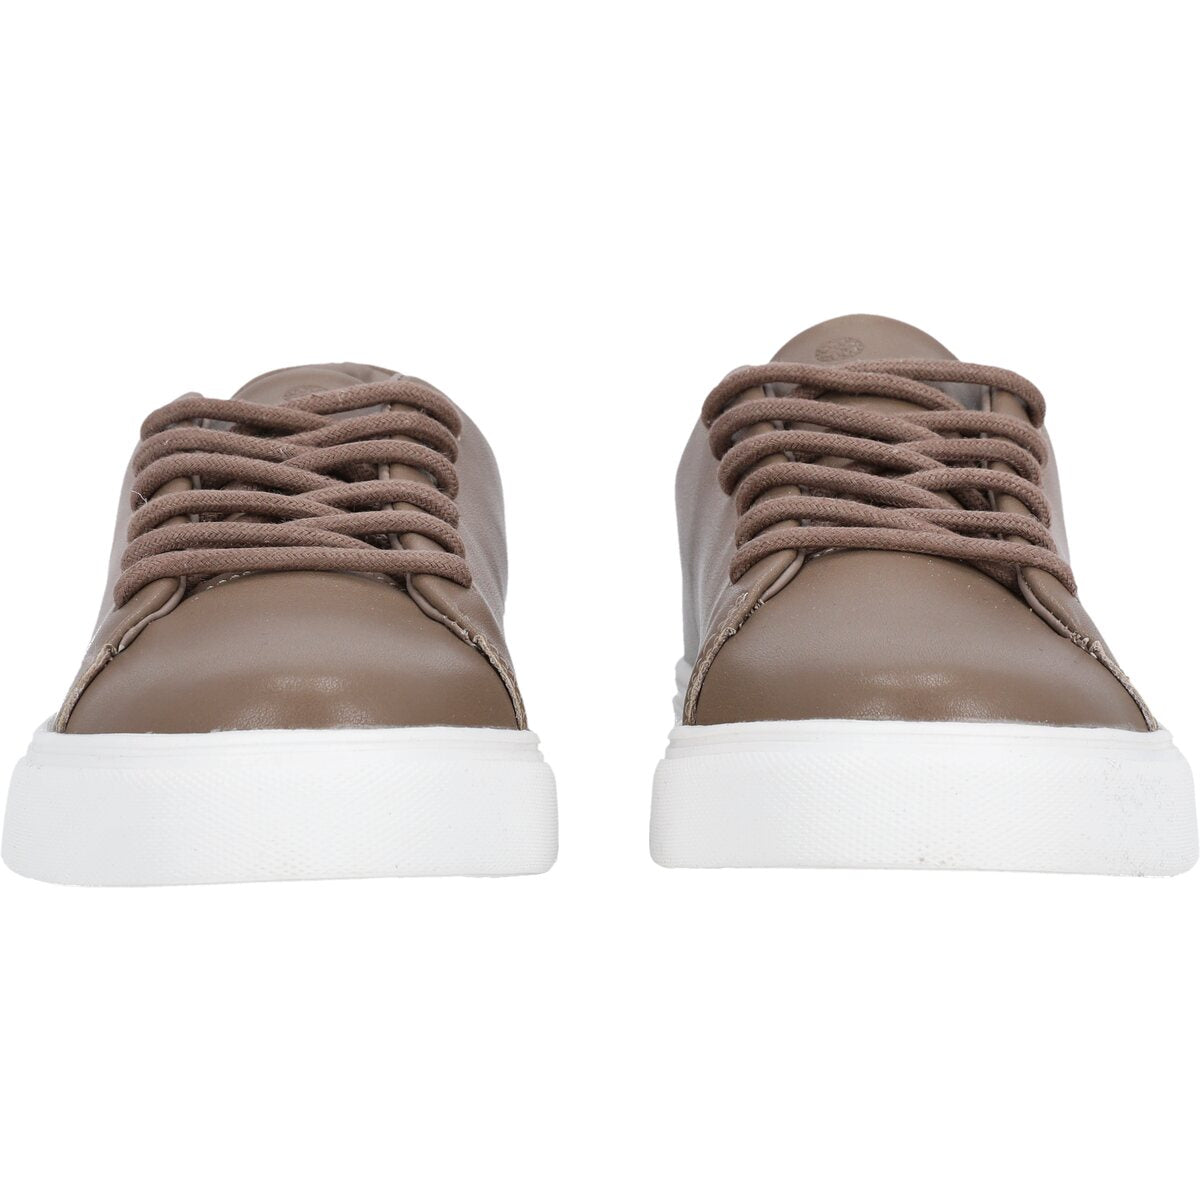 Athlecia Christinia Classic Sneakers - Taupe 6 Shaws Department Stores